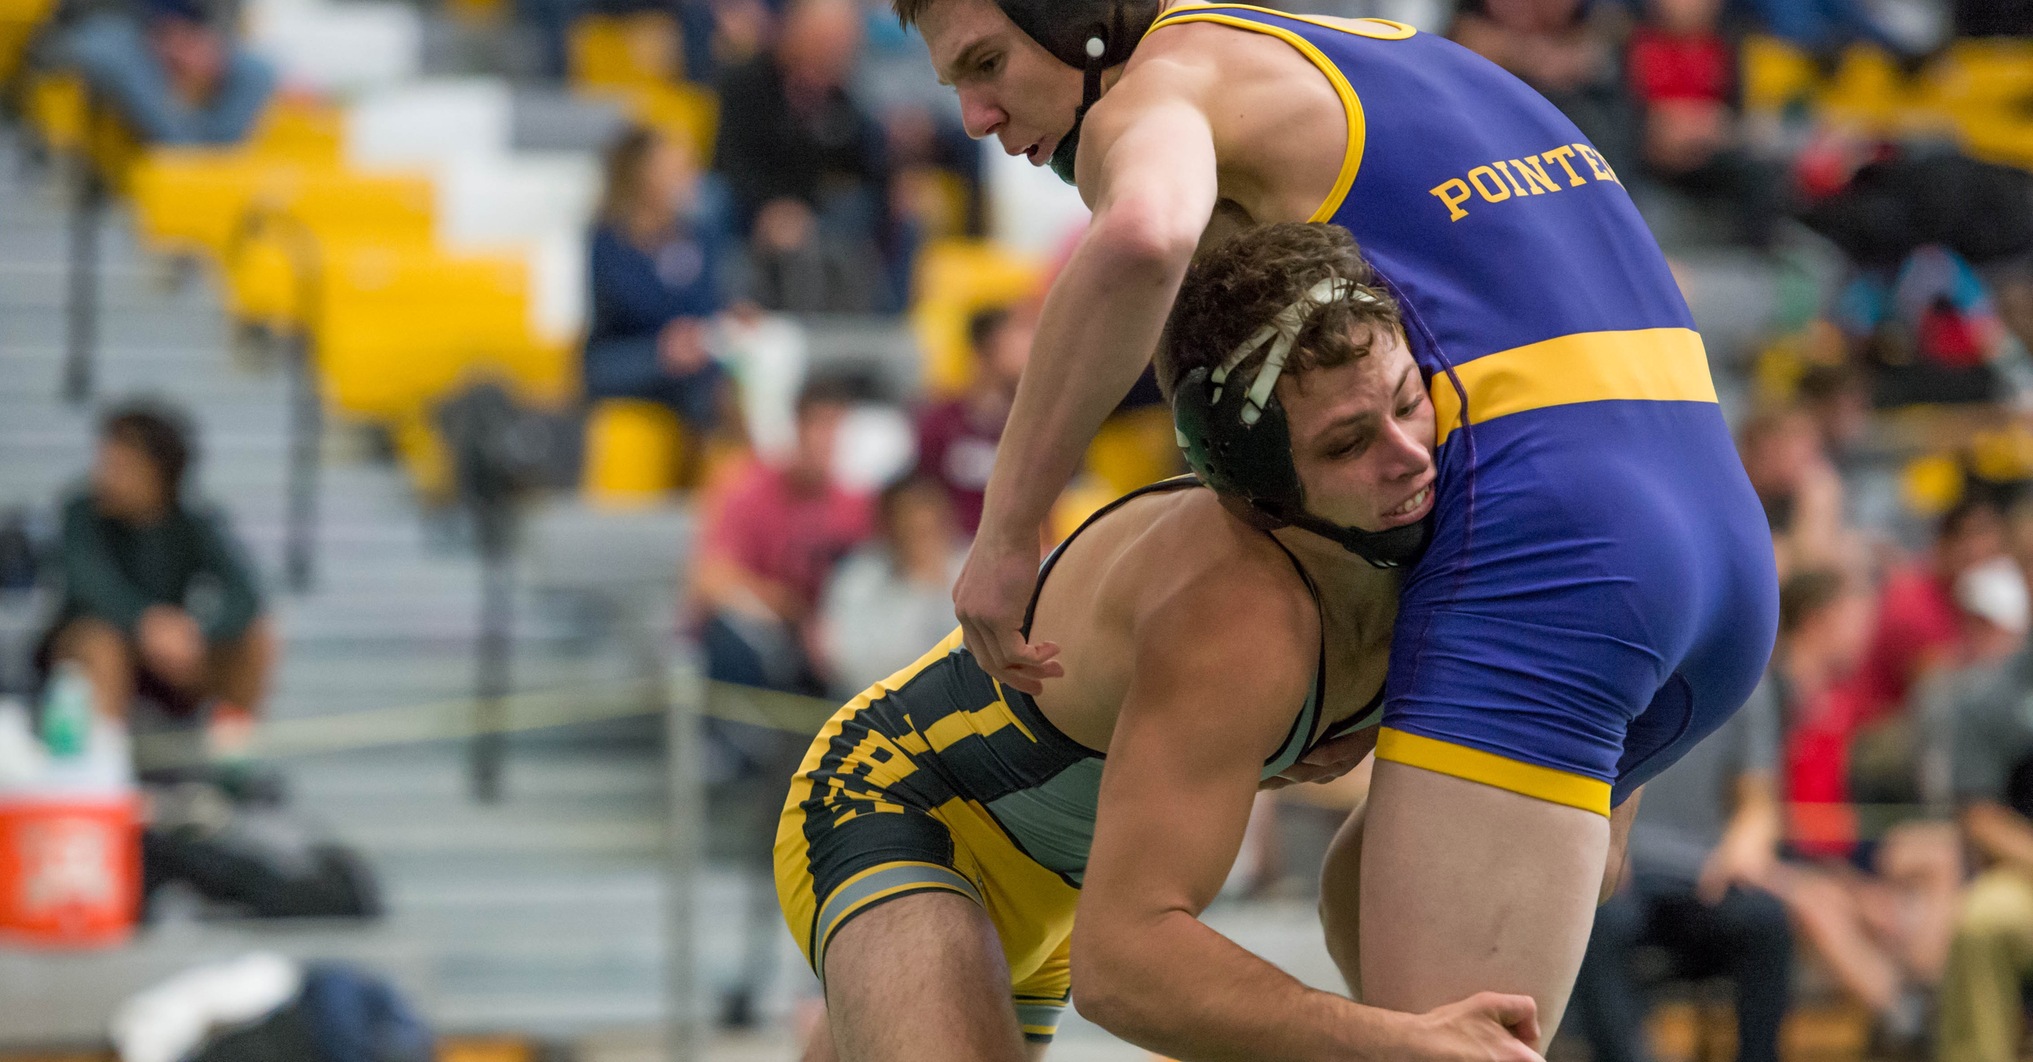 Nate Arquinego placed fourth in the 157-pound weight class at the Dan Gable Open.